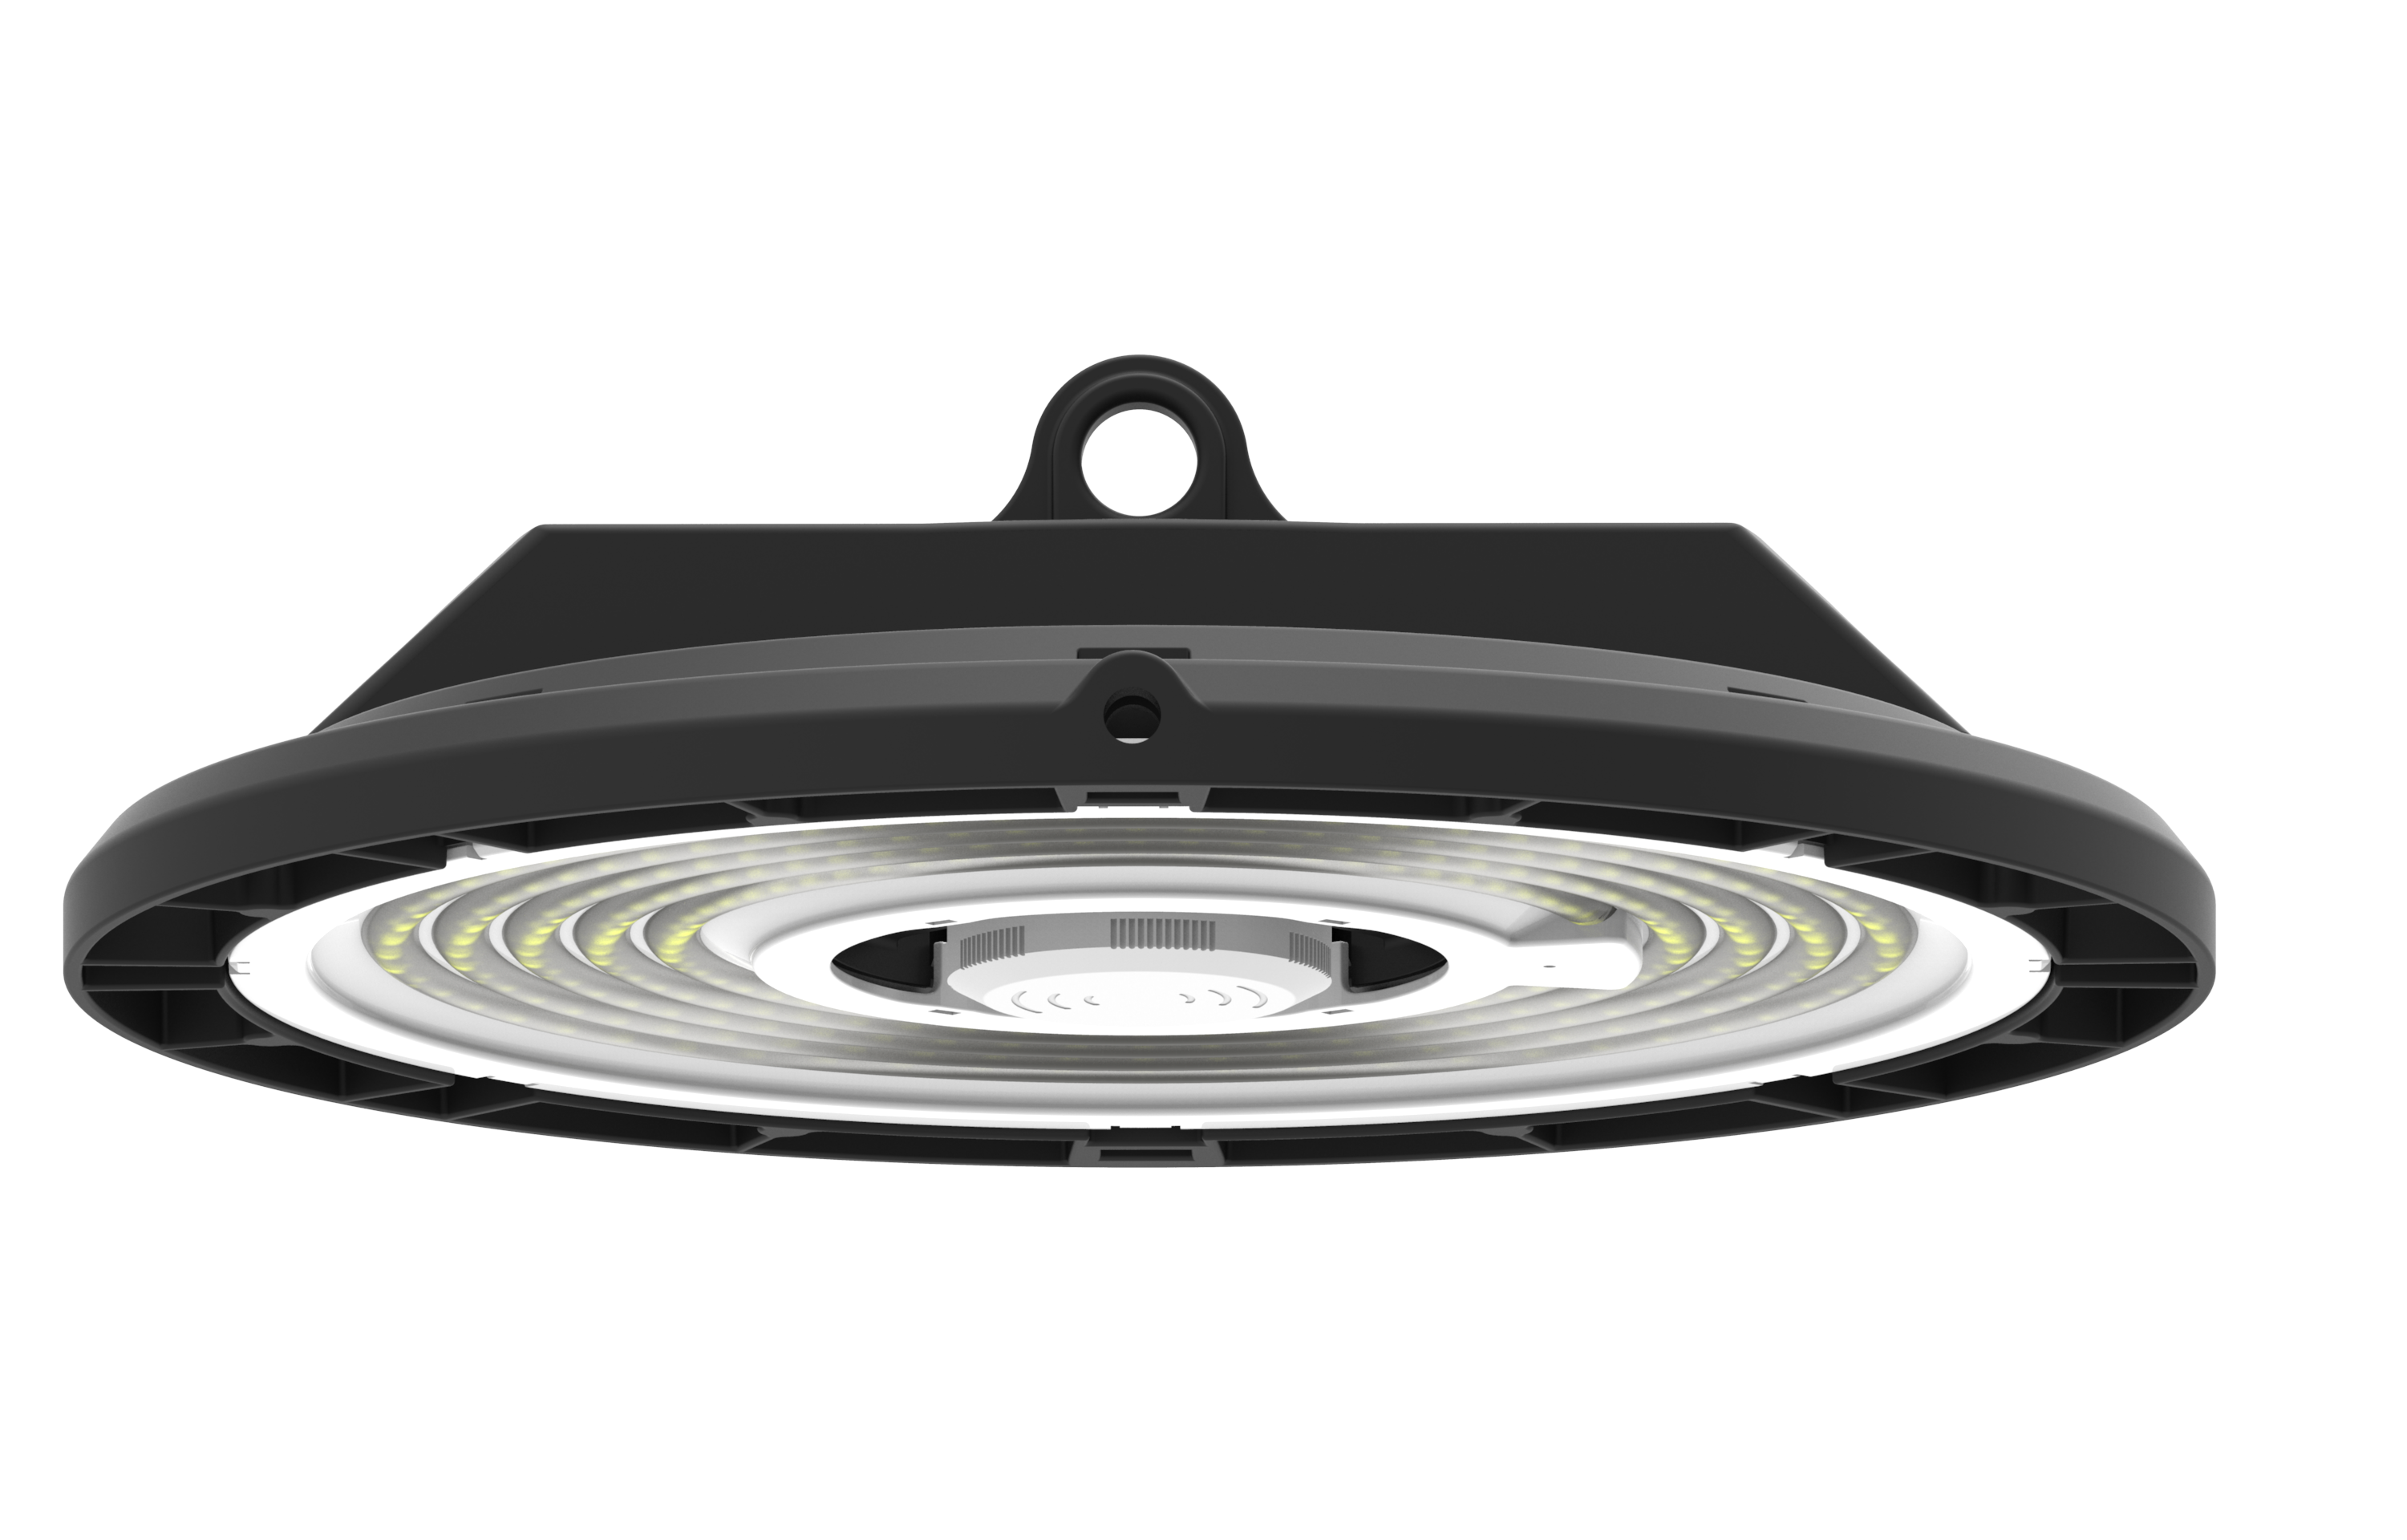 150W UFO LED High Bay Bridgelux LED 6000K 140lm W with Dimmable 3 in 1 DRIVER - ENER-J Smart Home